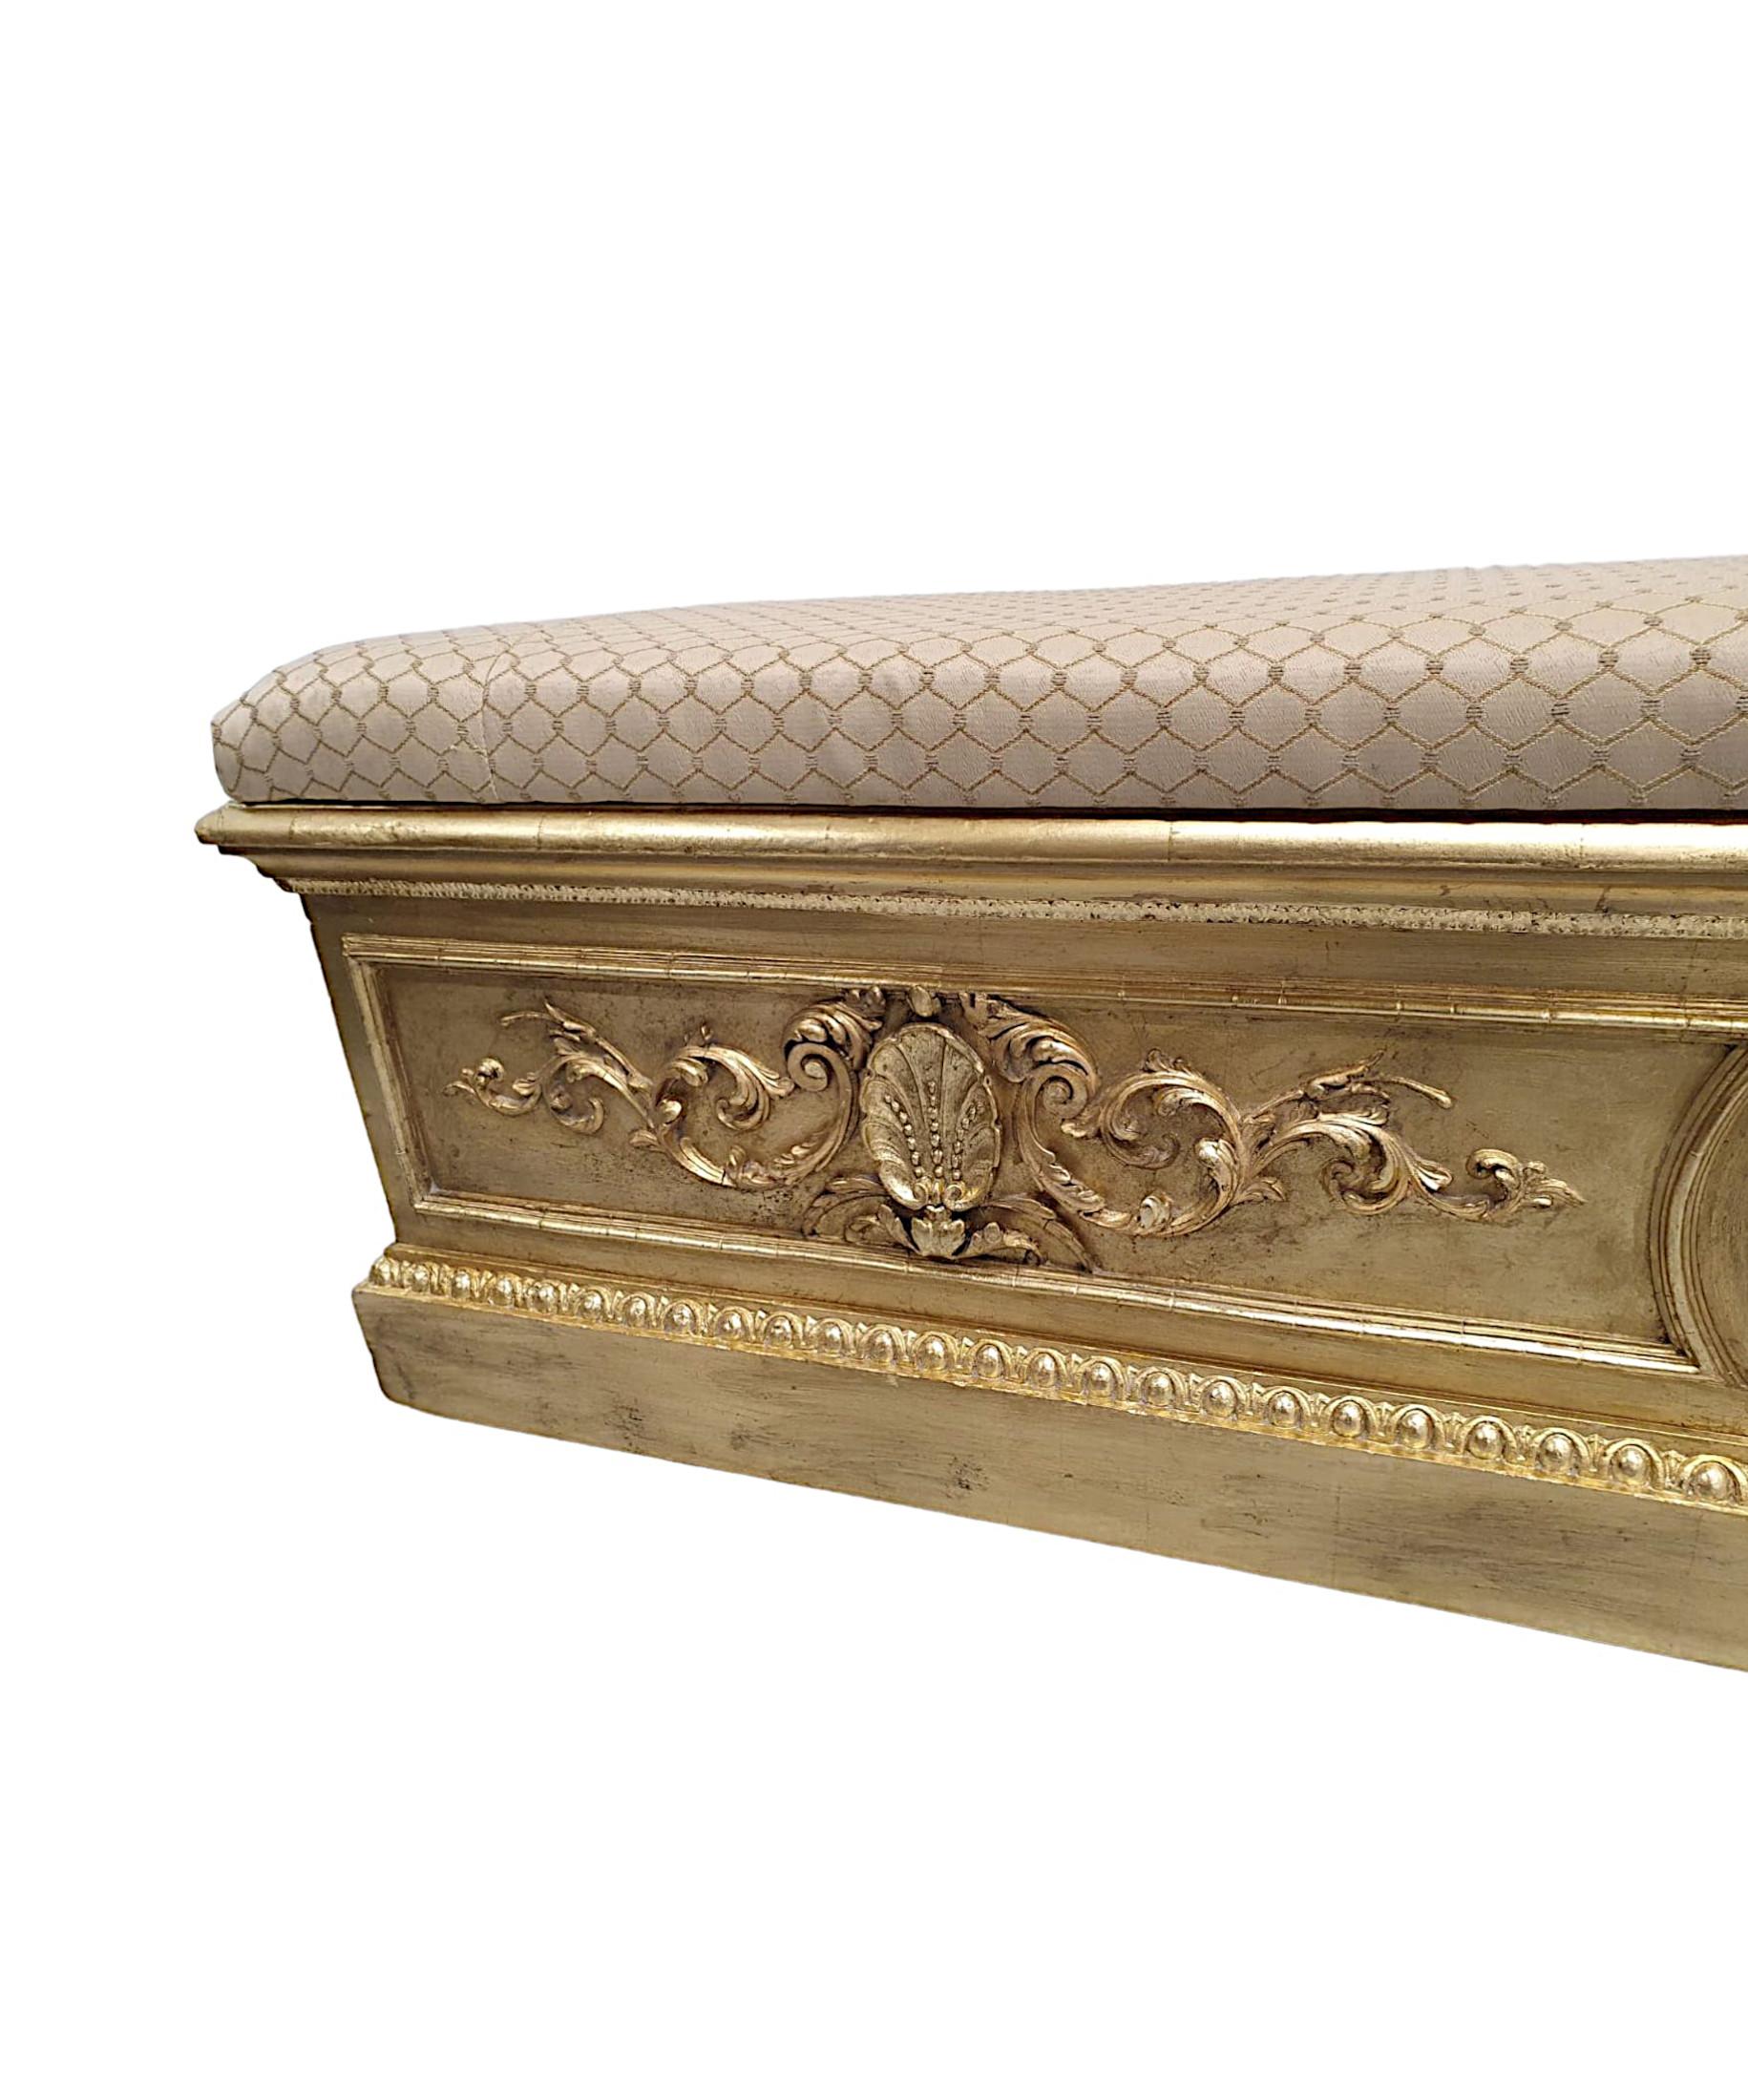 A very rare 19th Century giltwood Country House jardiniere converted to a long stool, fully restored, finely hand carved and of exceptional quality.  The gorgeous cushioned lift up seat of rectangular form is upholstered in a beautiful cream and